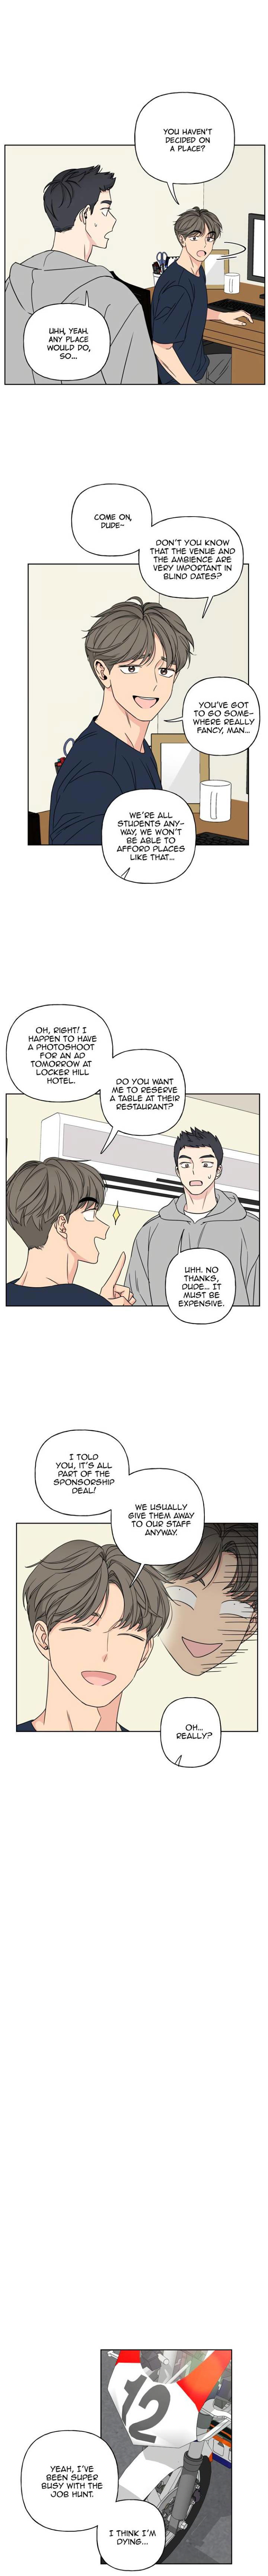 mother-im-sorry-chap-23-4